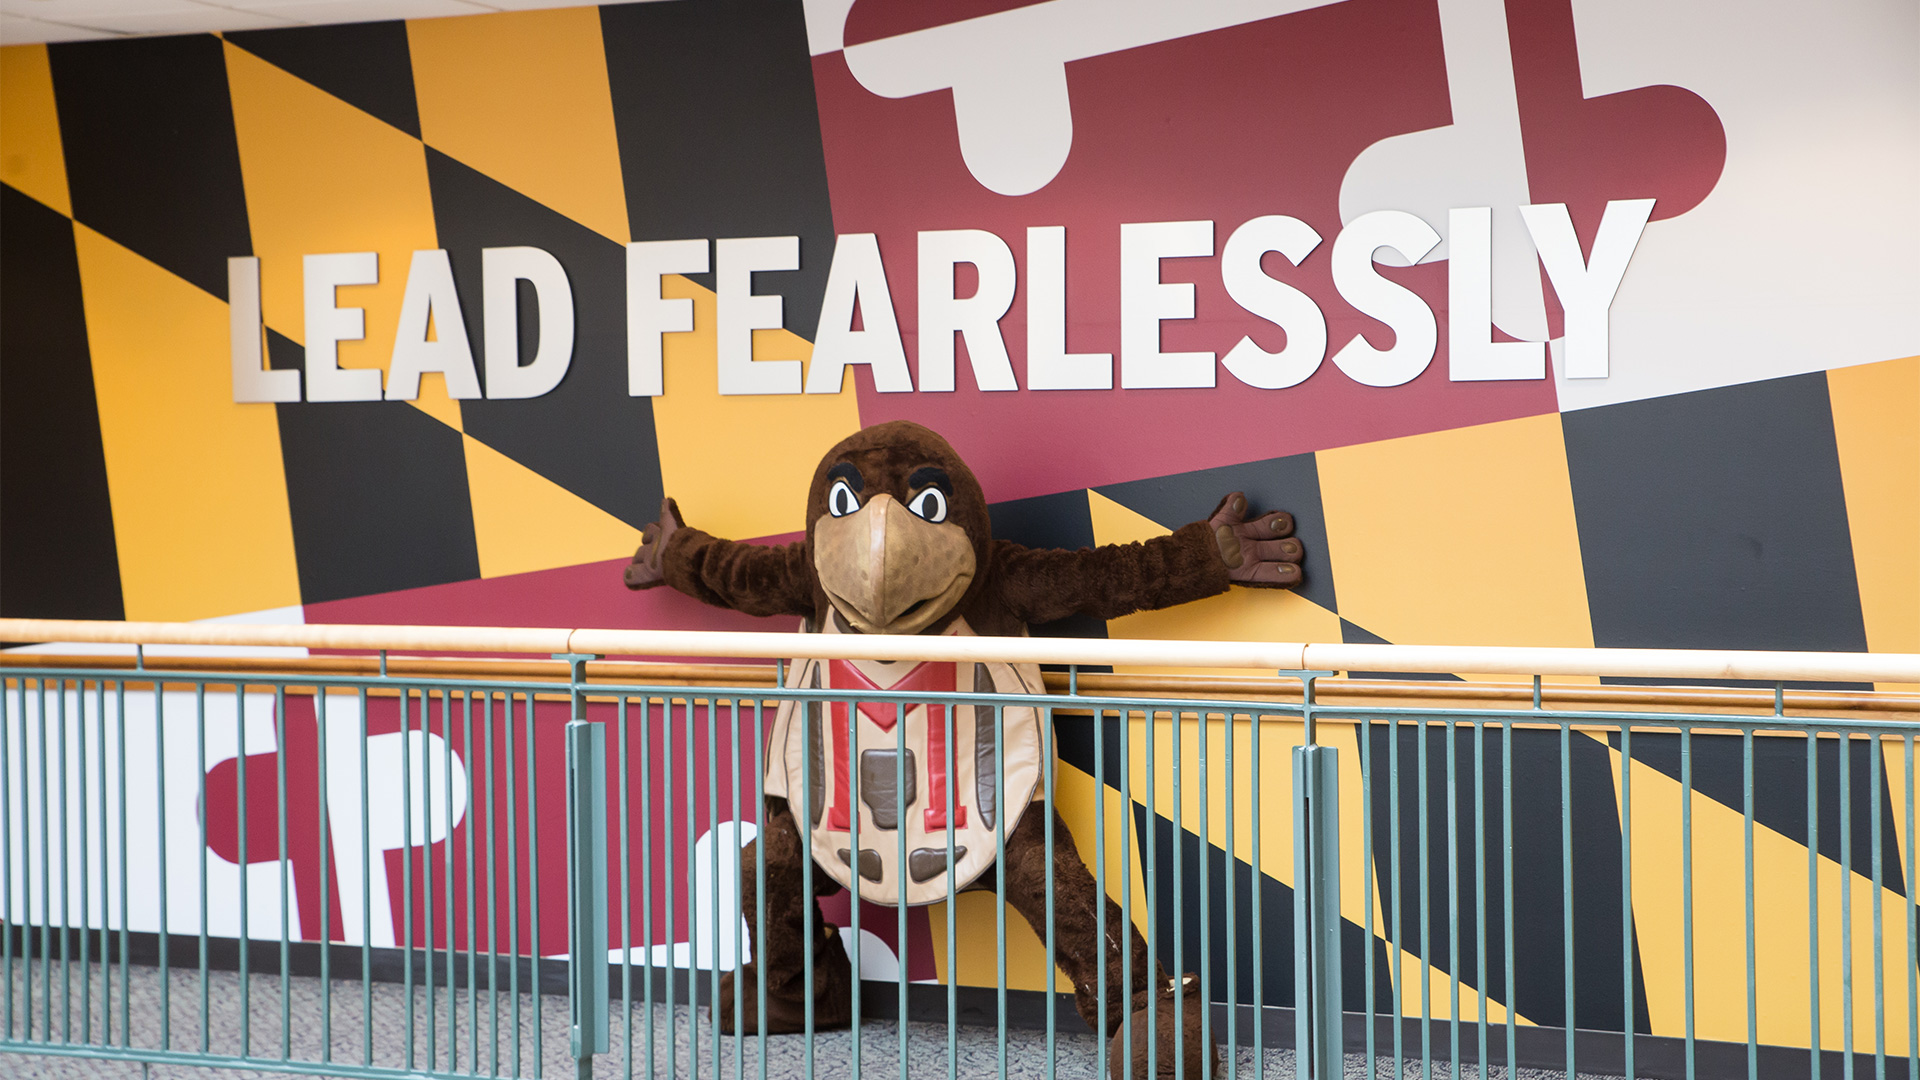 Testudo under a 'Lead Fearlessly' banner